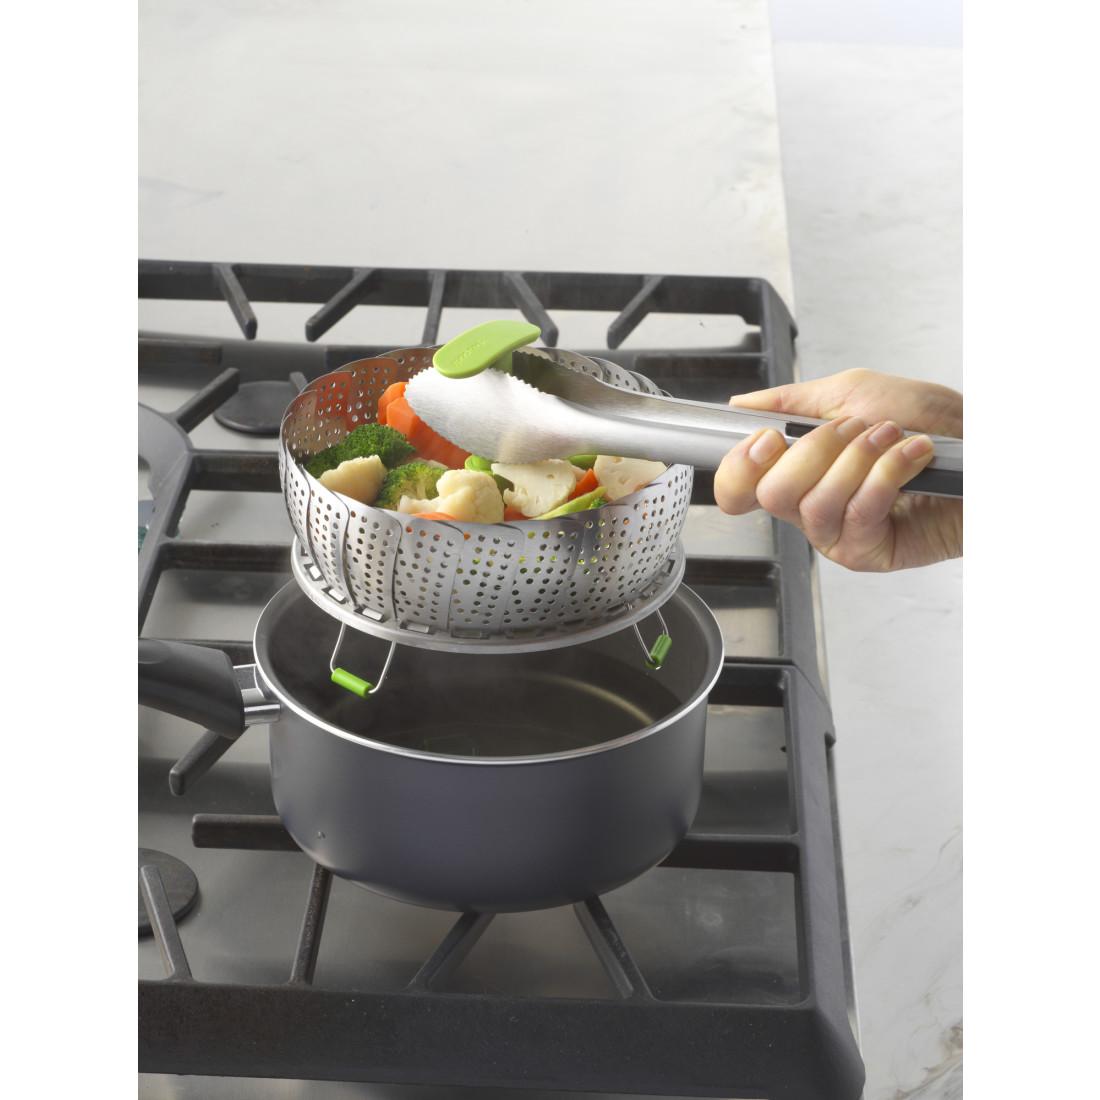 GoodCook Touch Stainless Steel Steamer Basket; image 3 of 5